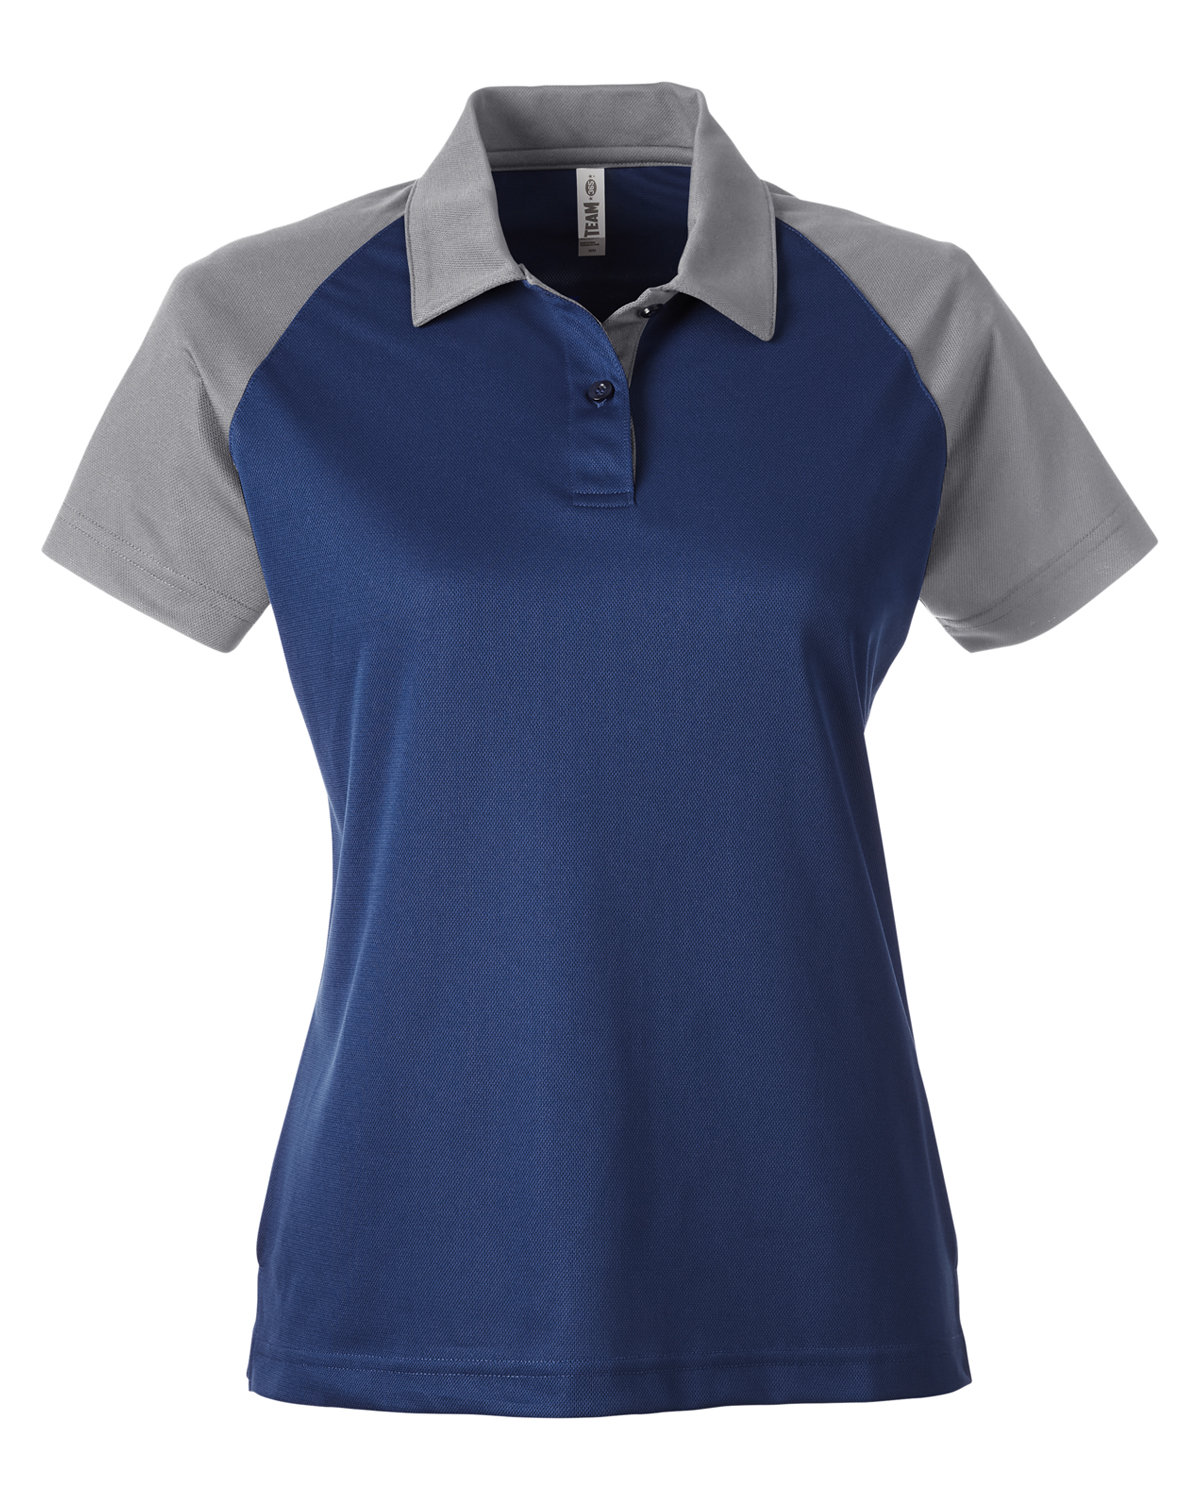 Team 365 TT21CW - Ladies' Command Snag-Protection Colorblock Polo